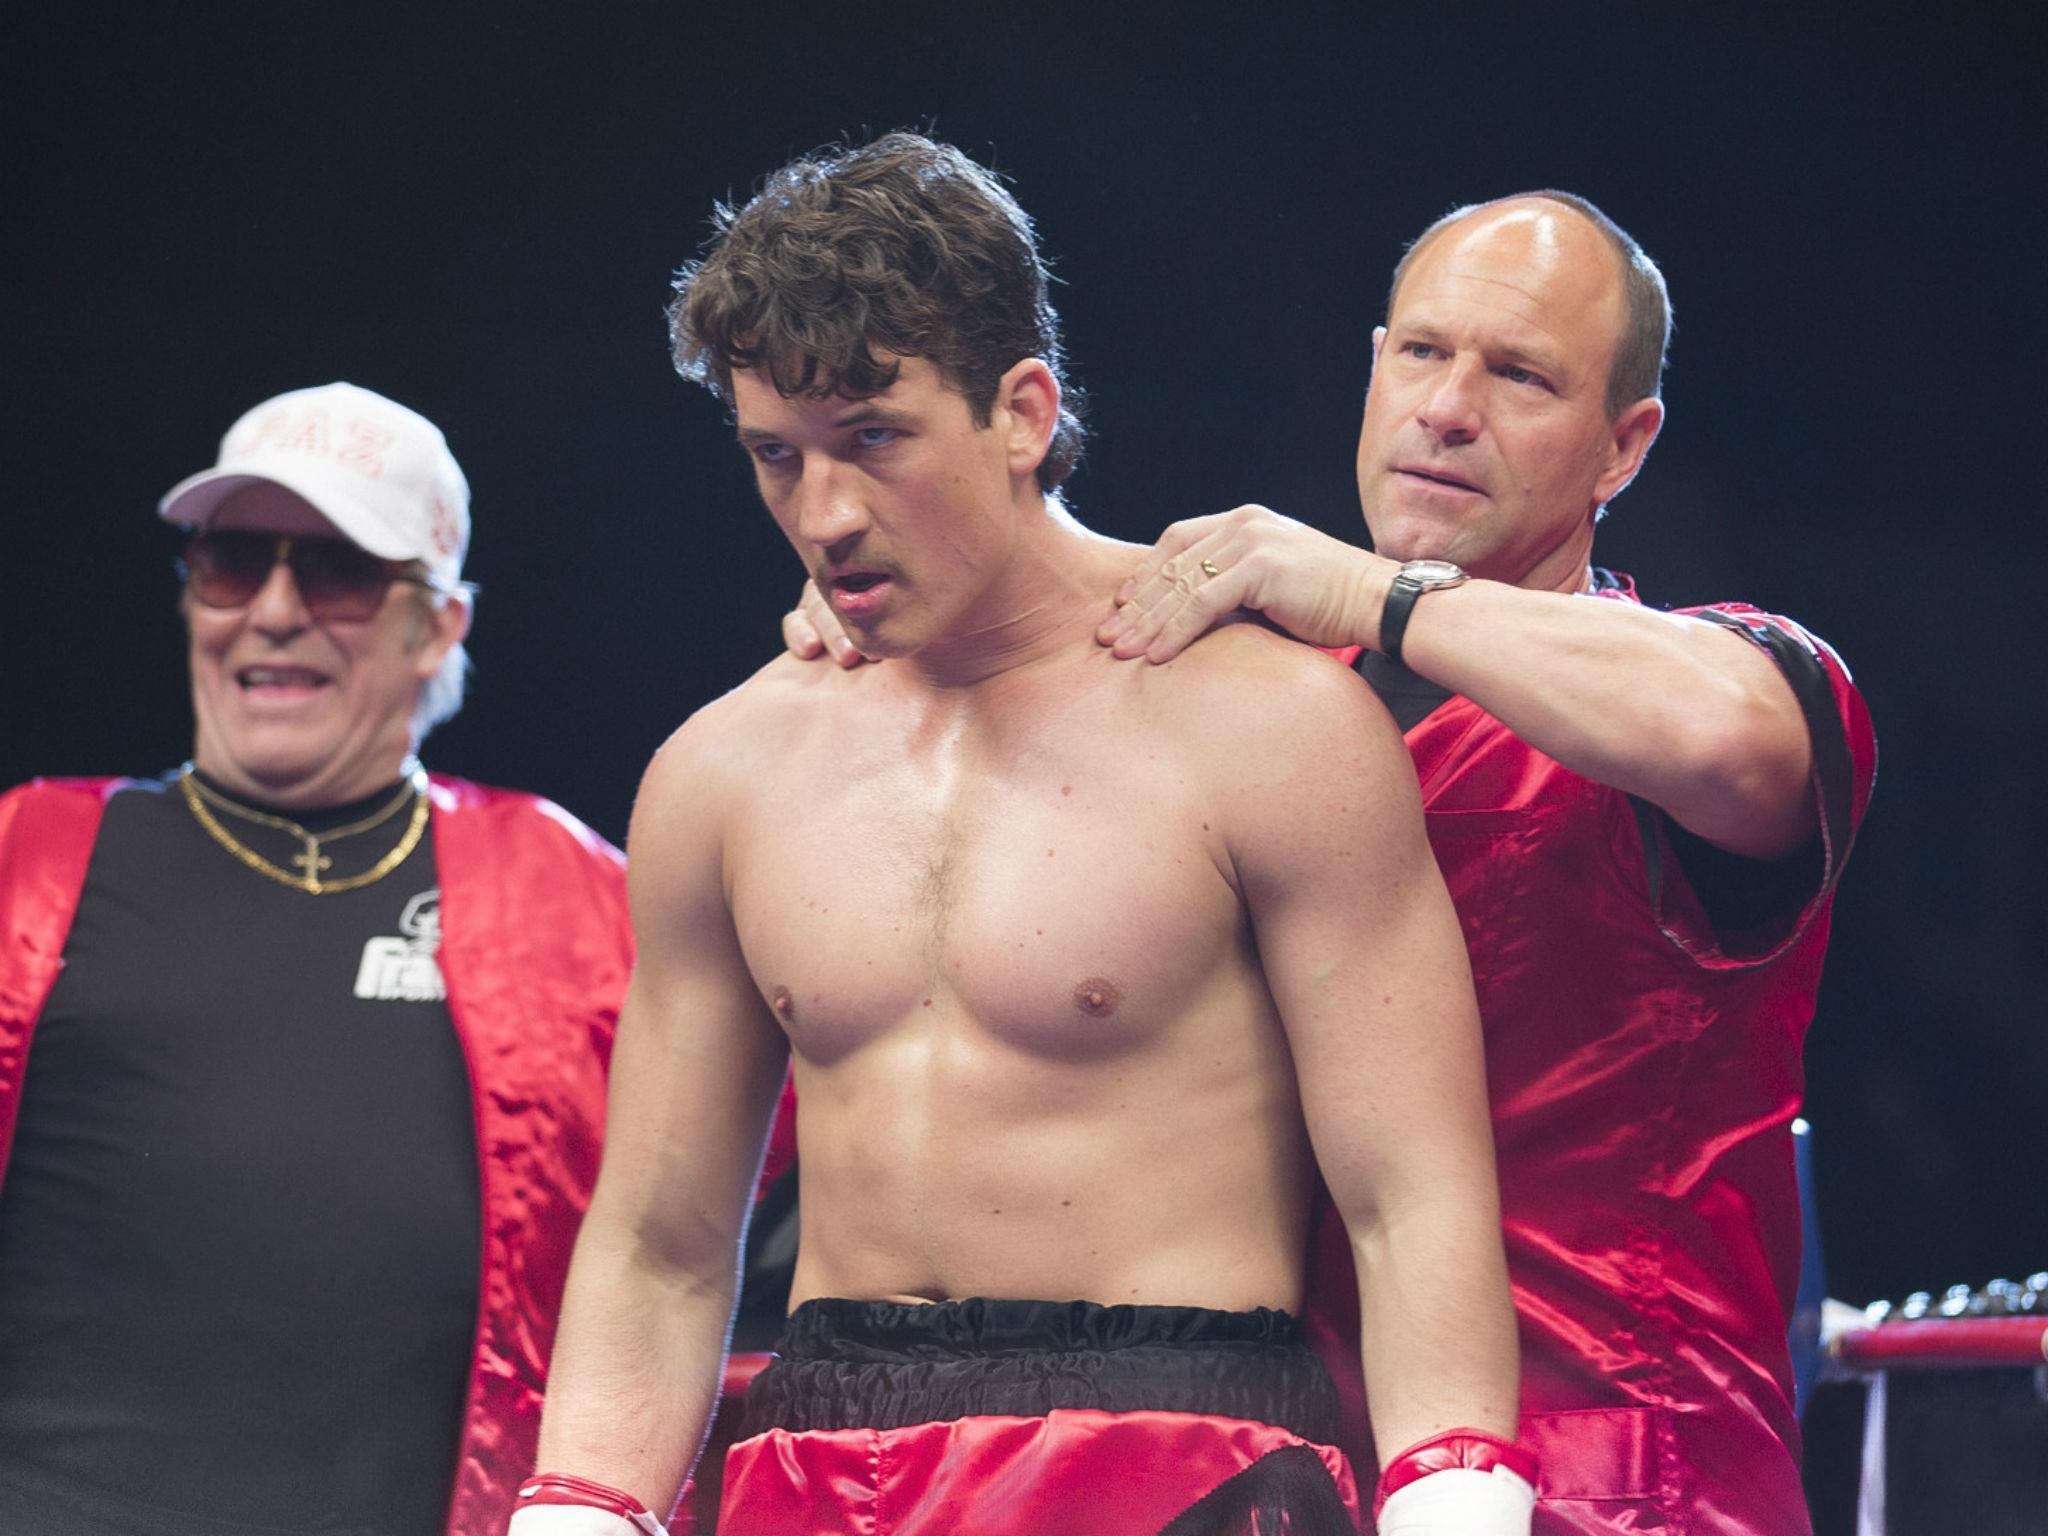 Rubbing shoulders: Aaron Eckhart as the legendary trainer Kevin Rooney in ‘Bleed For This’ – with Miles Teller as boxer Vinny Pazienza